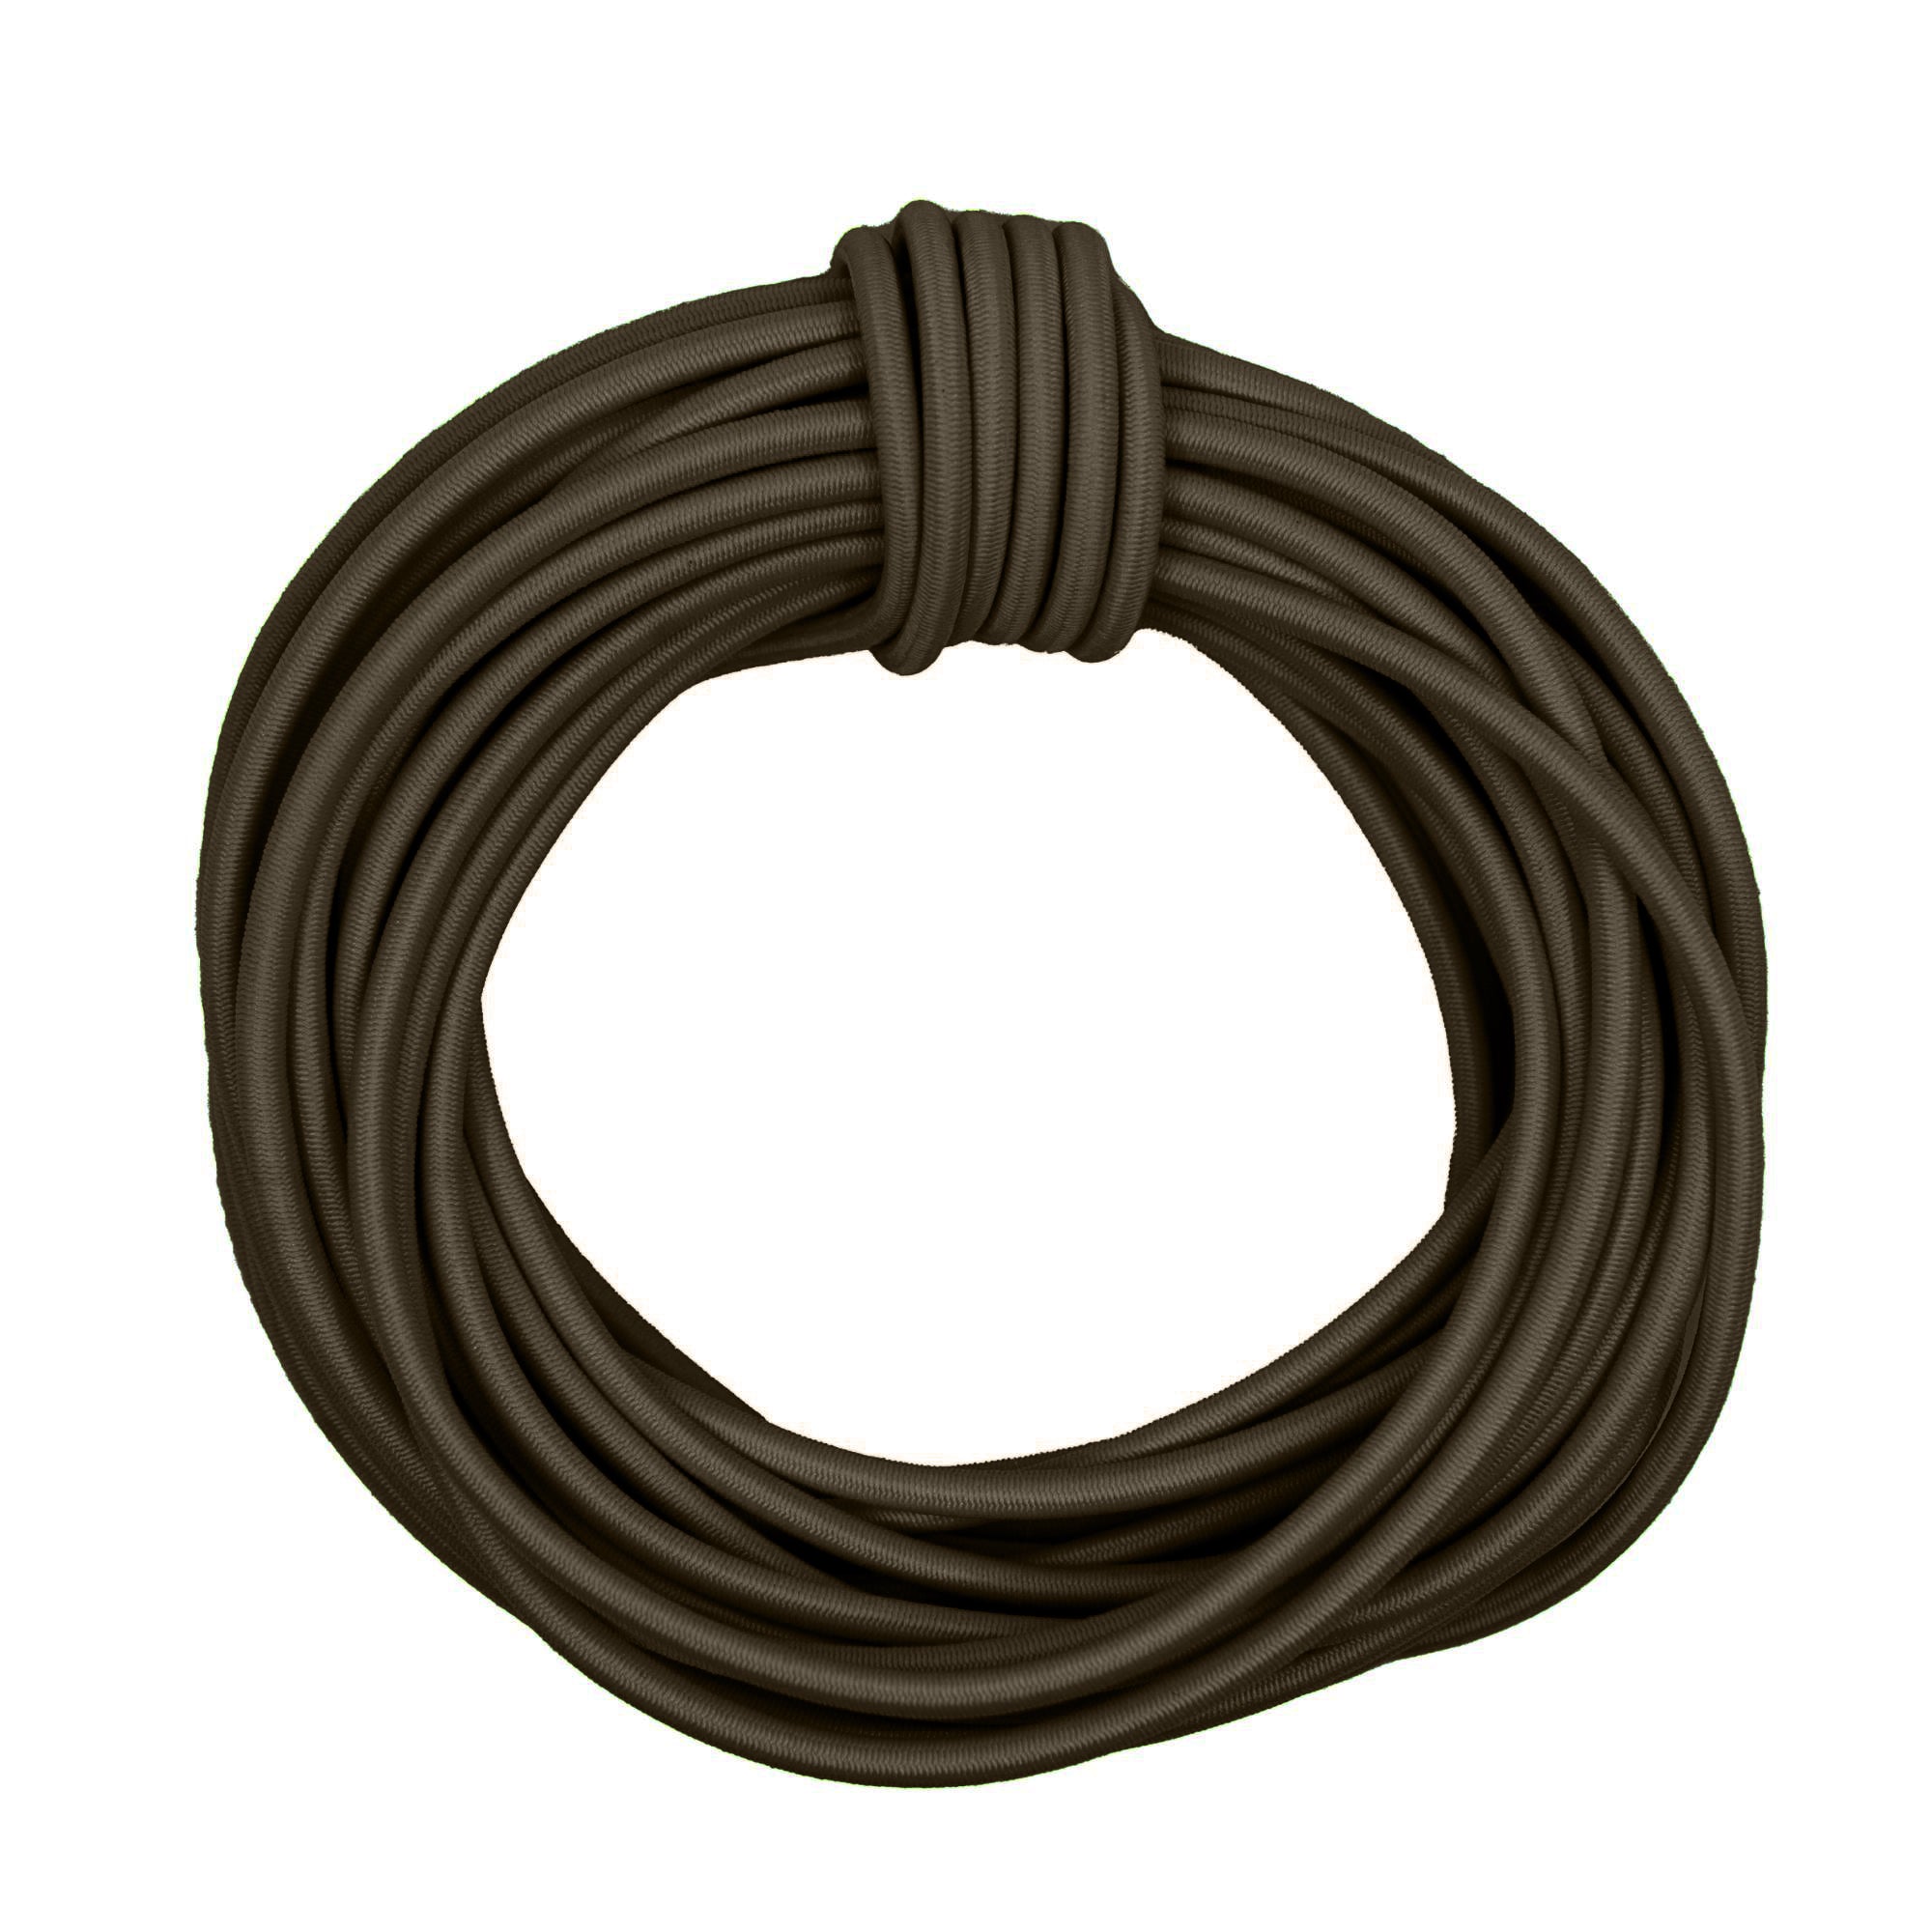 STRETCH CORD, 3 CONDUCTOR - WITH 1-12 GAUGE & 2-14